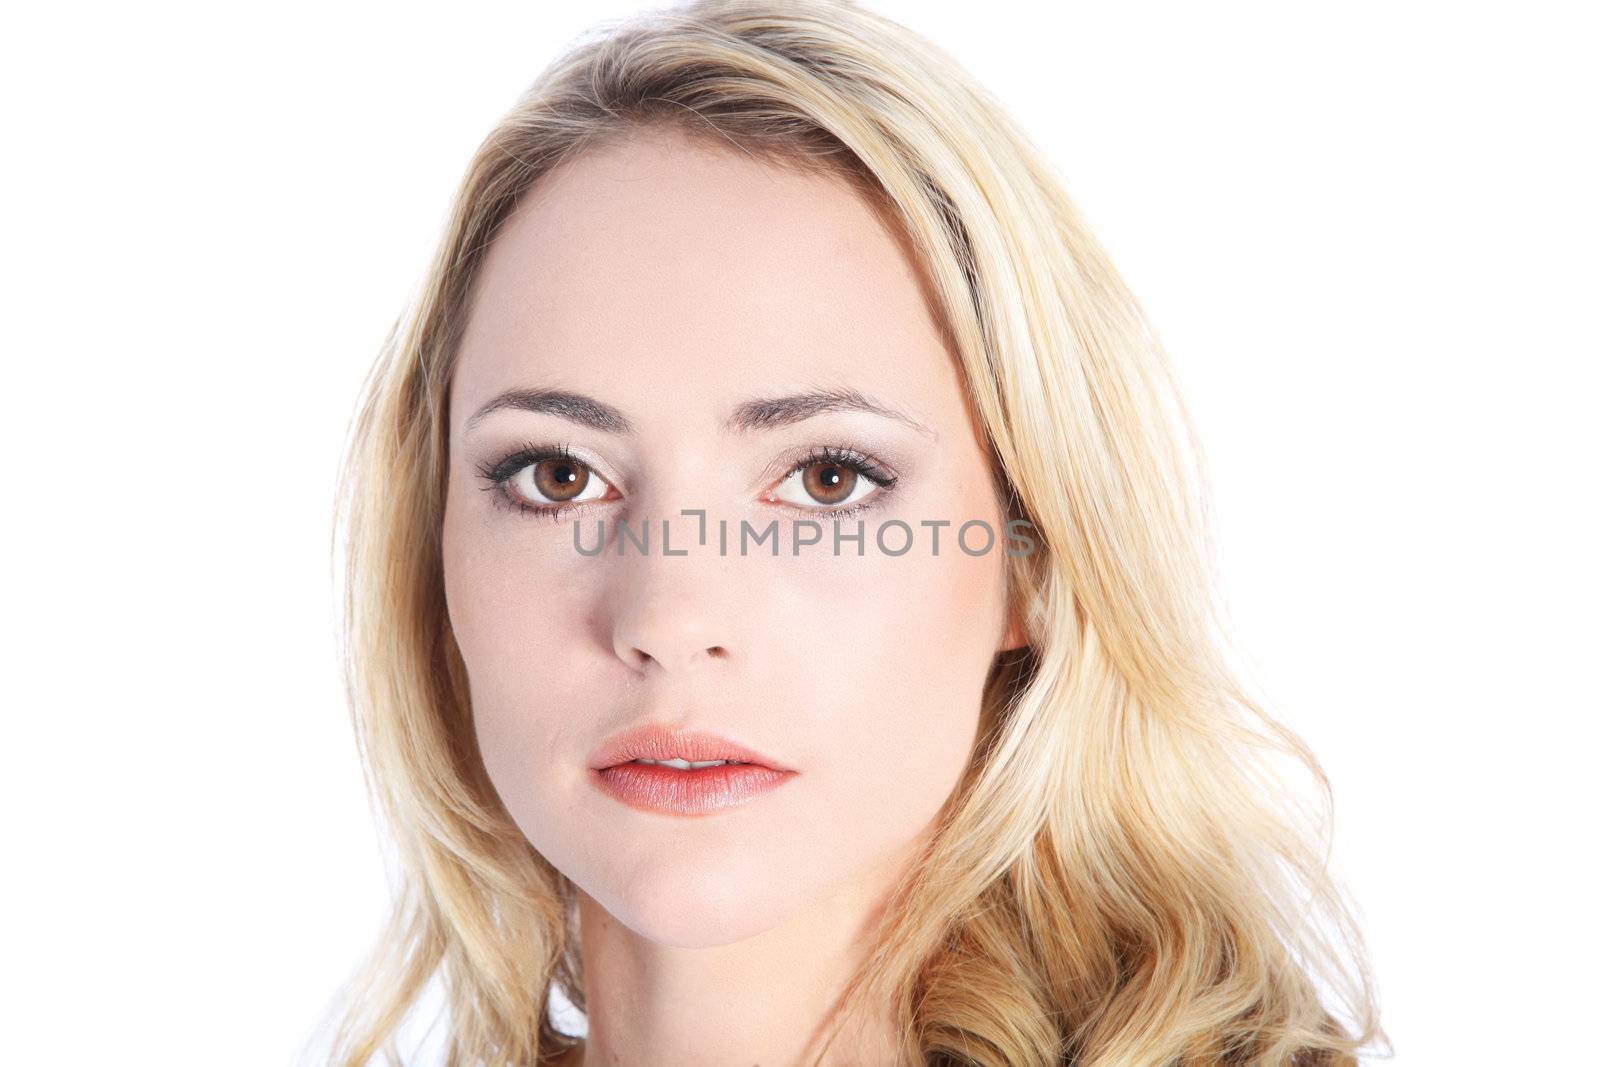 Woman with an expressionless face and deadpan expression isolated on white Woman with expressionless face and deadpan expression isolated on white